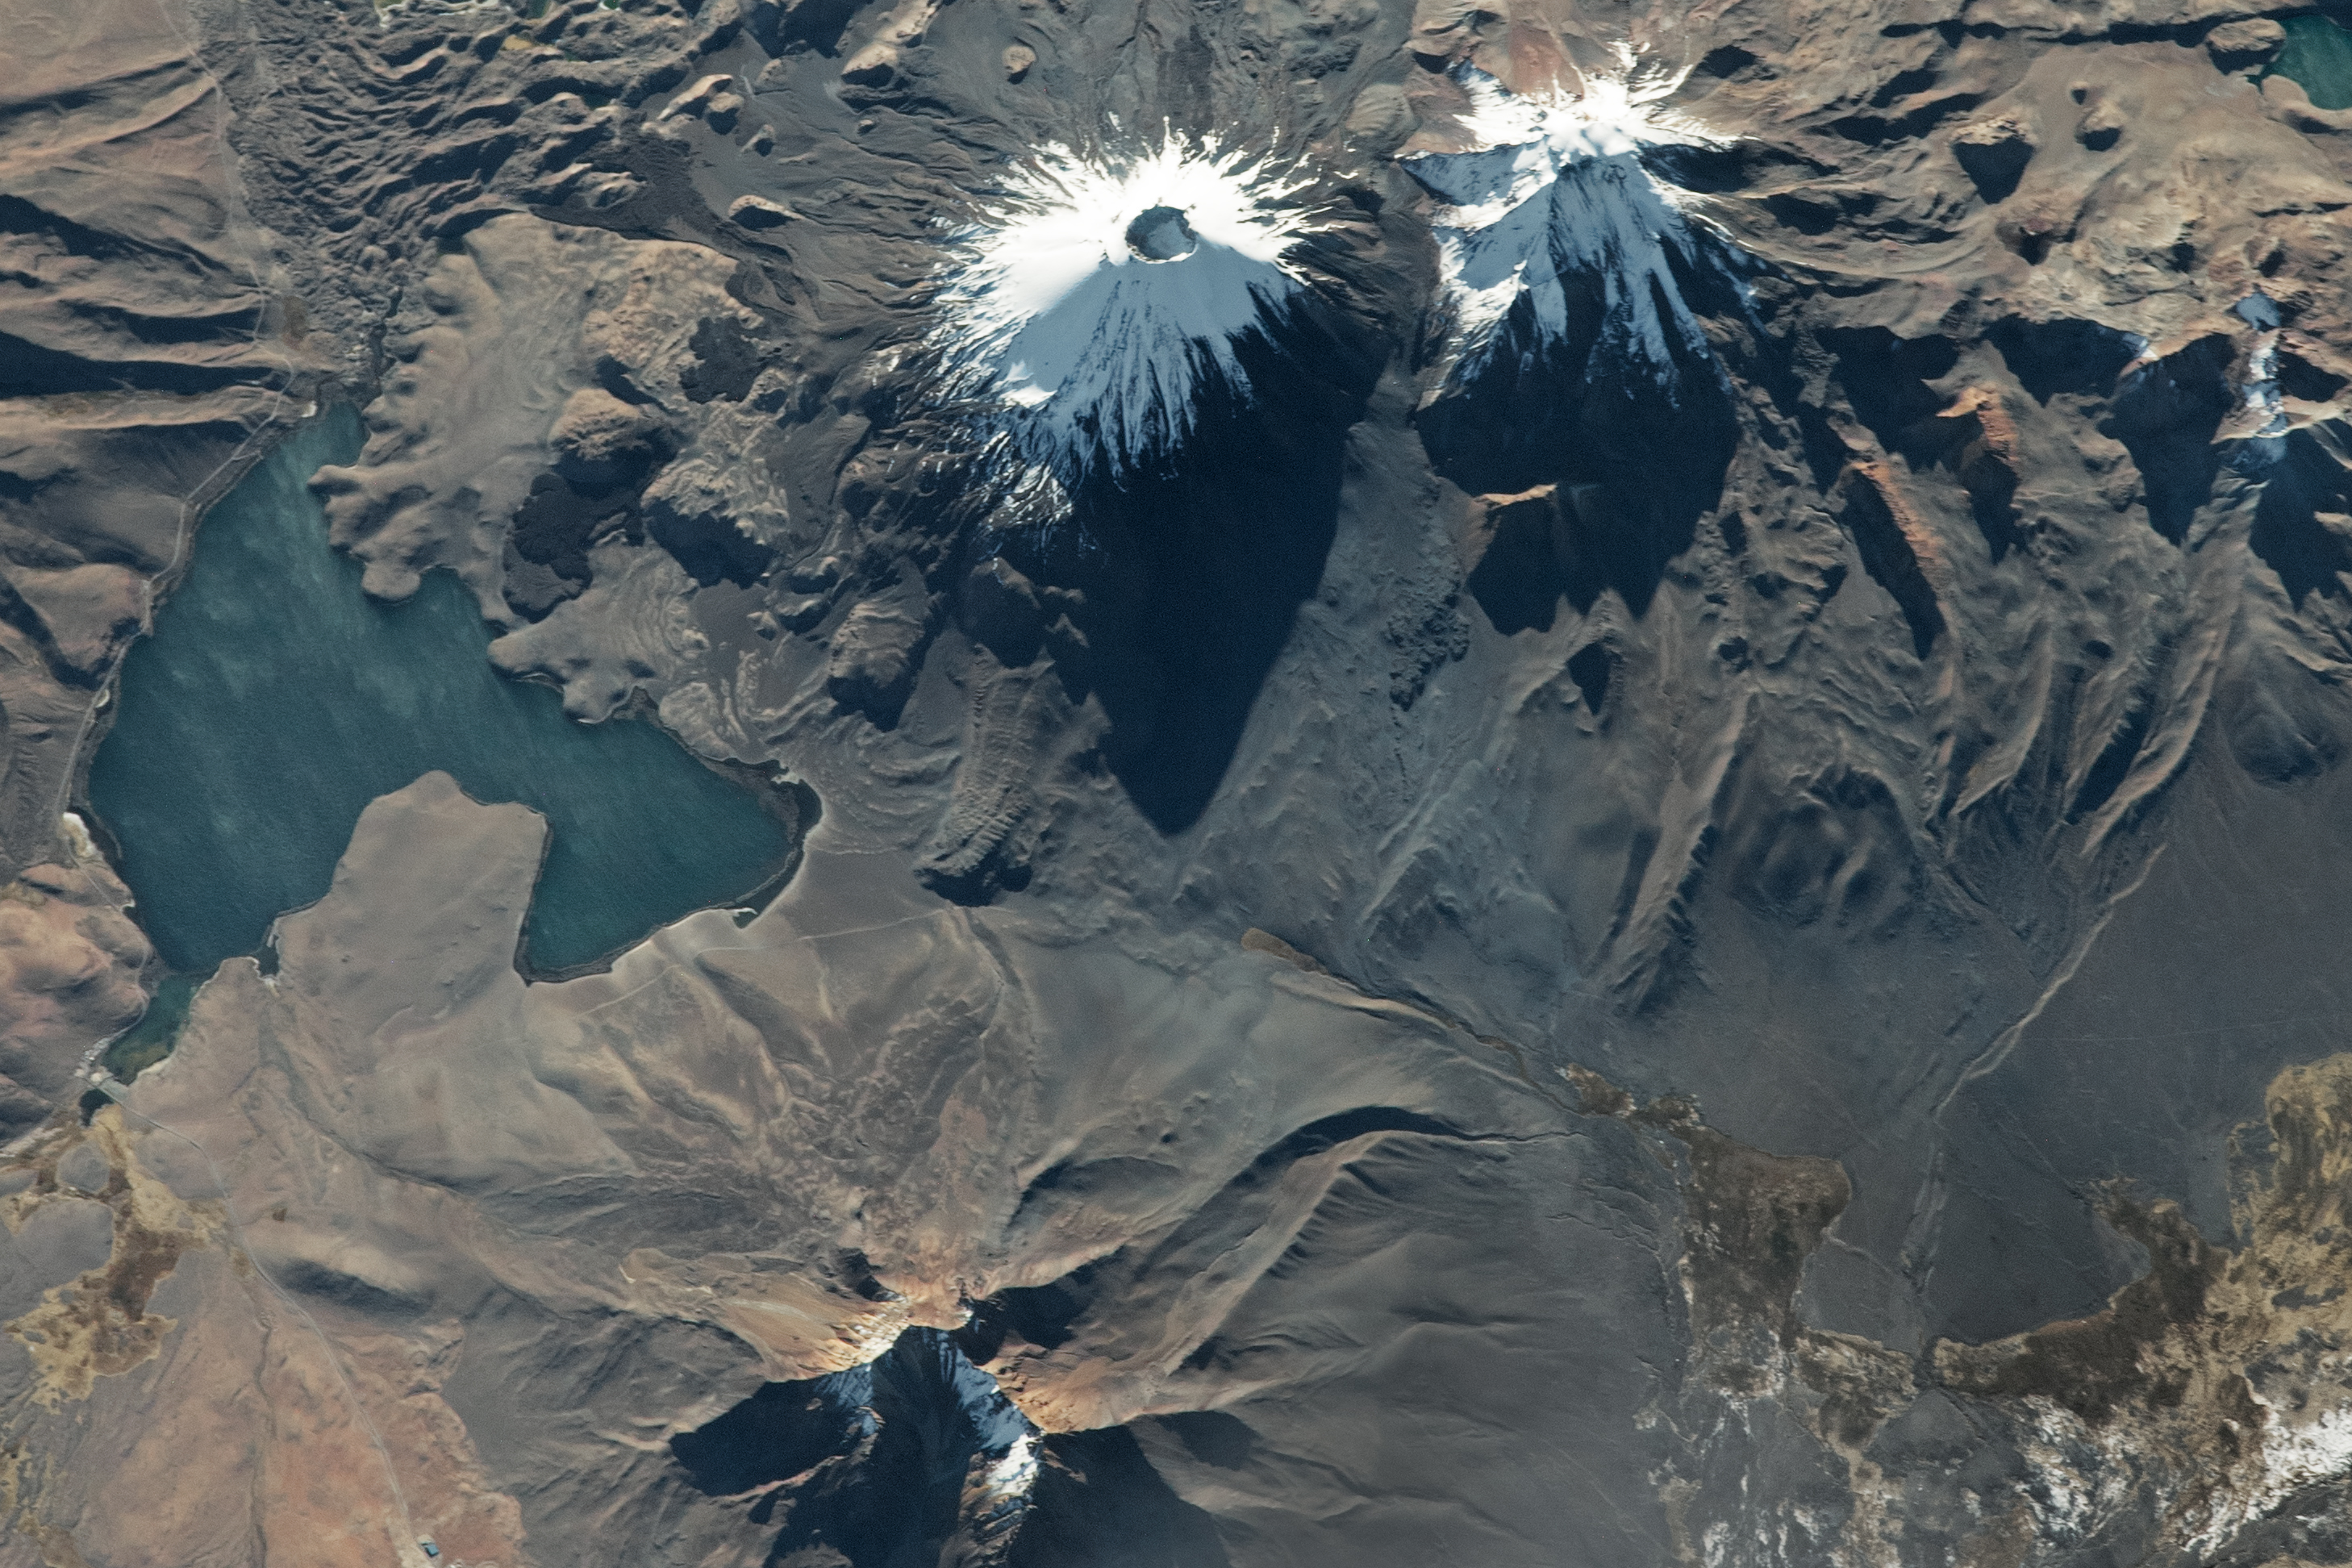 The Parinacota and Pomerape volcanoes rise like twins along the Chile-Bolivia border, but close inspection reveals distinct differences in their appearance.